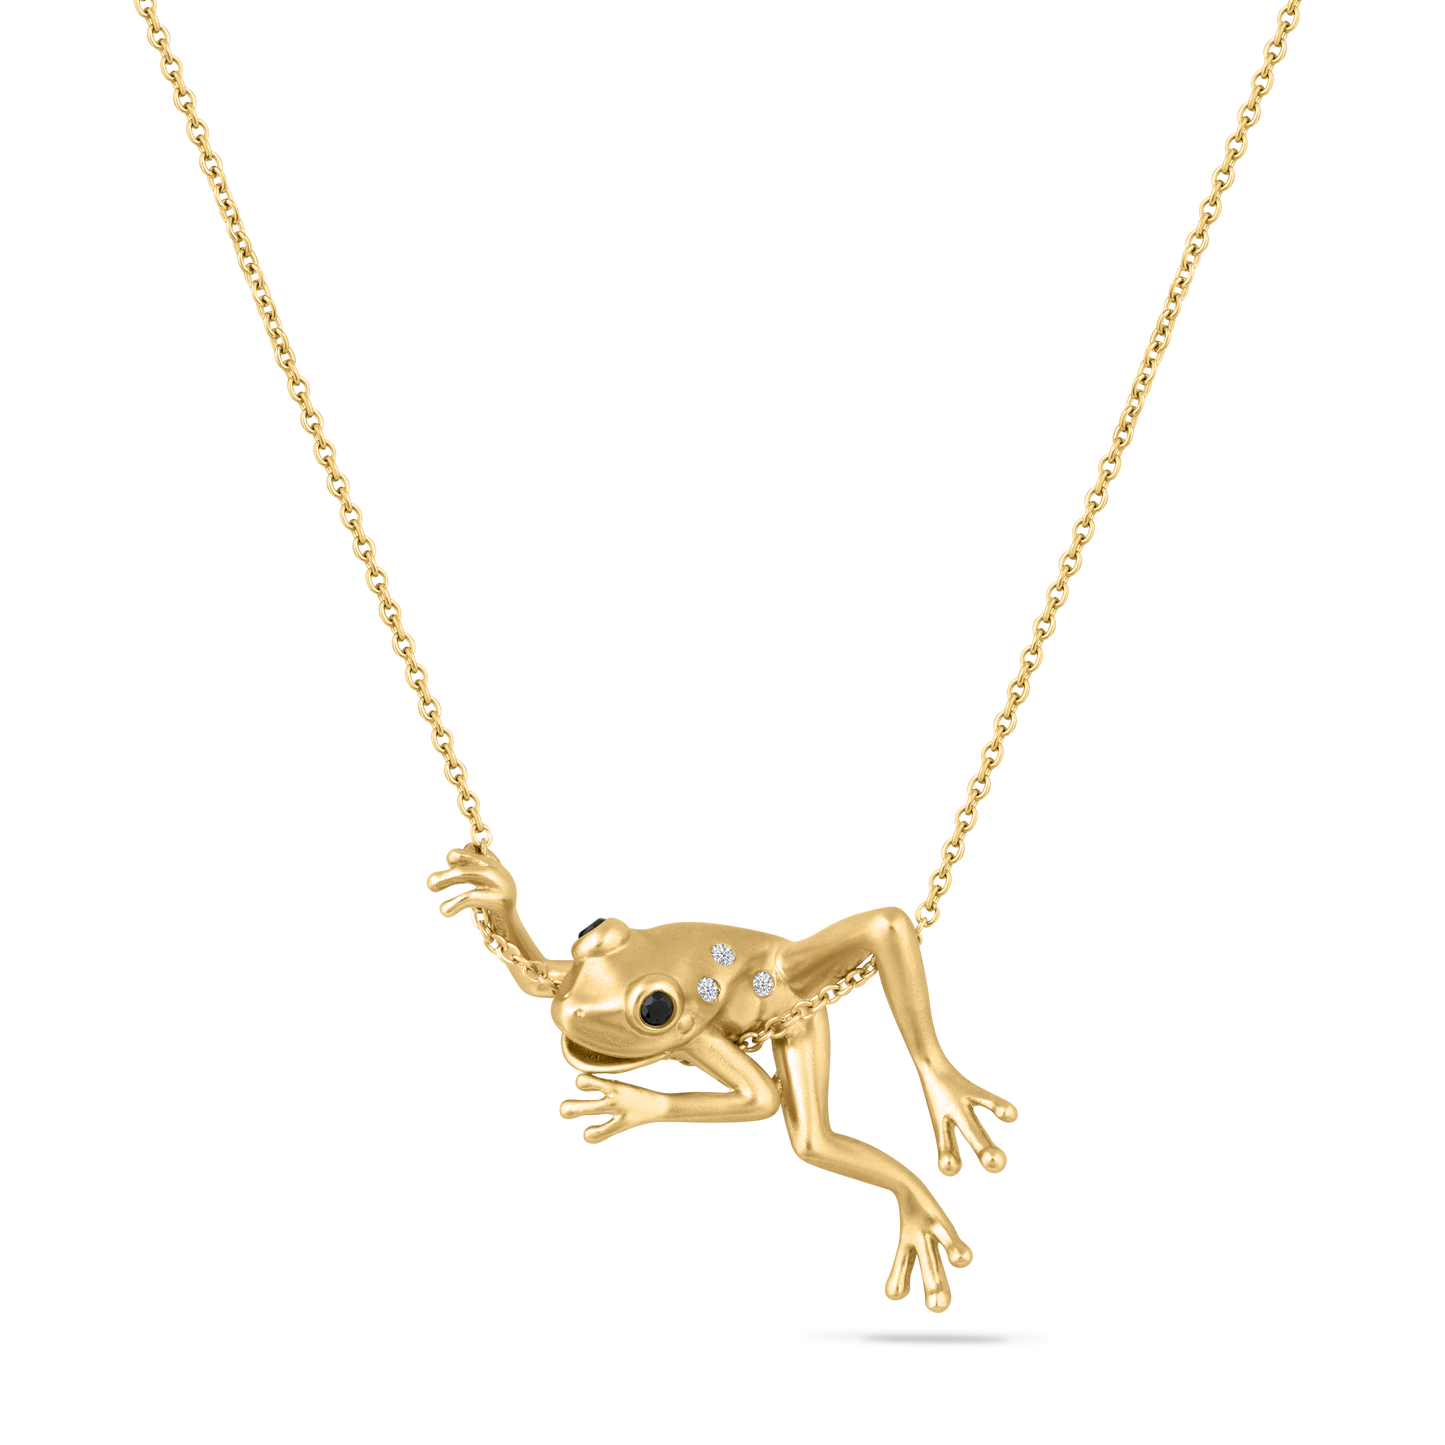 14K FROG NECKLACE WITH 3 DIAMONDS 0.016CT, 2 BLD 0.038CT ON 18 INCHES CHAIN